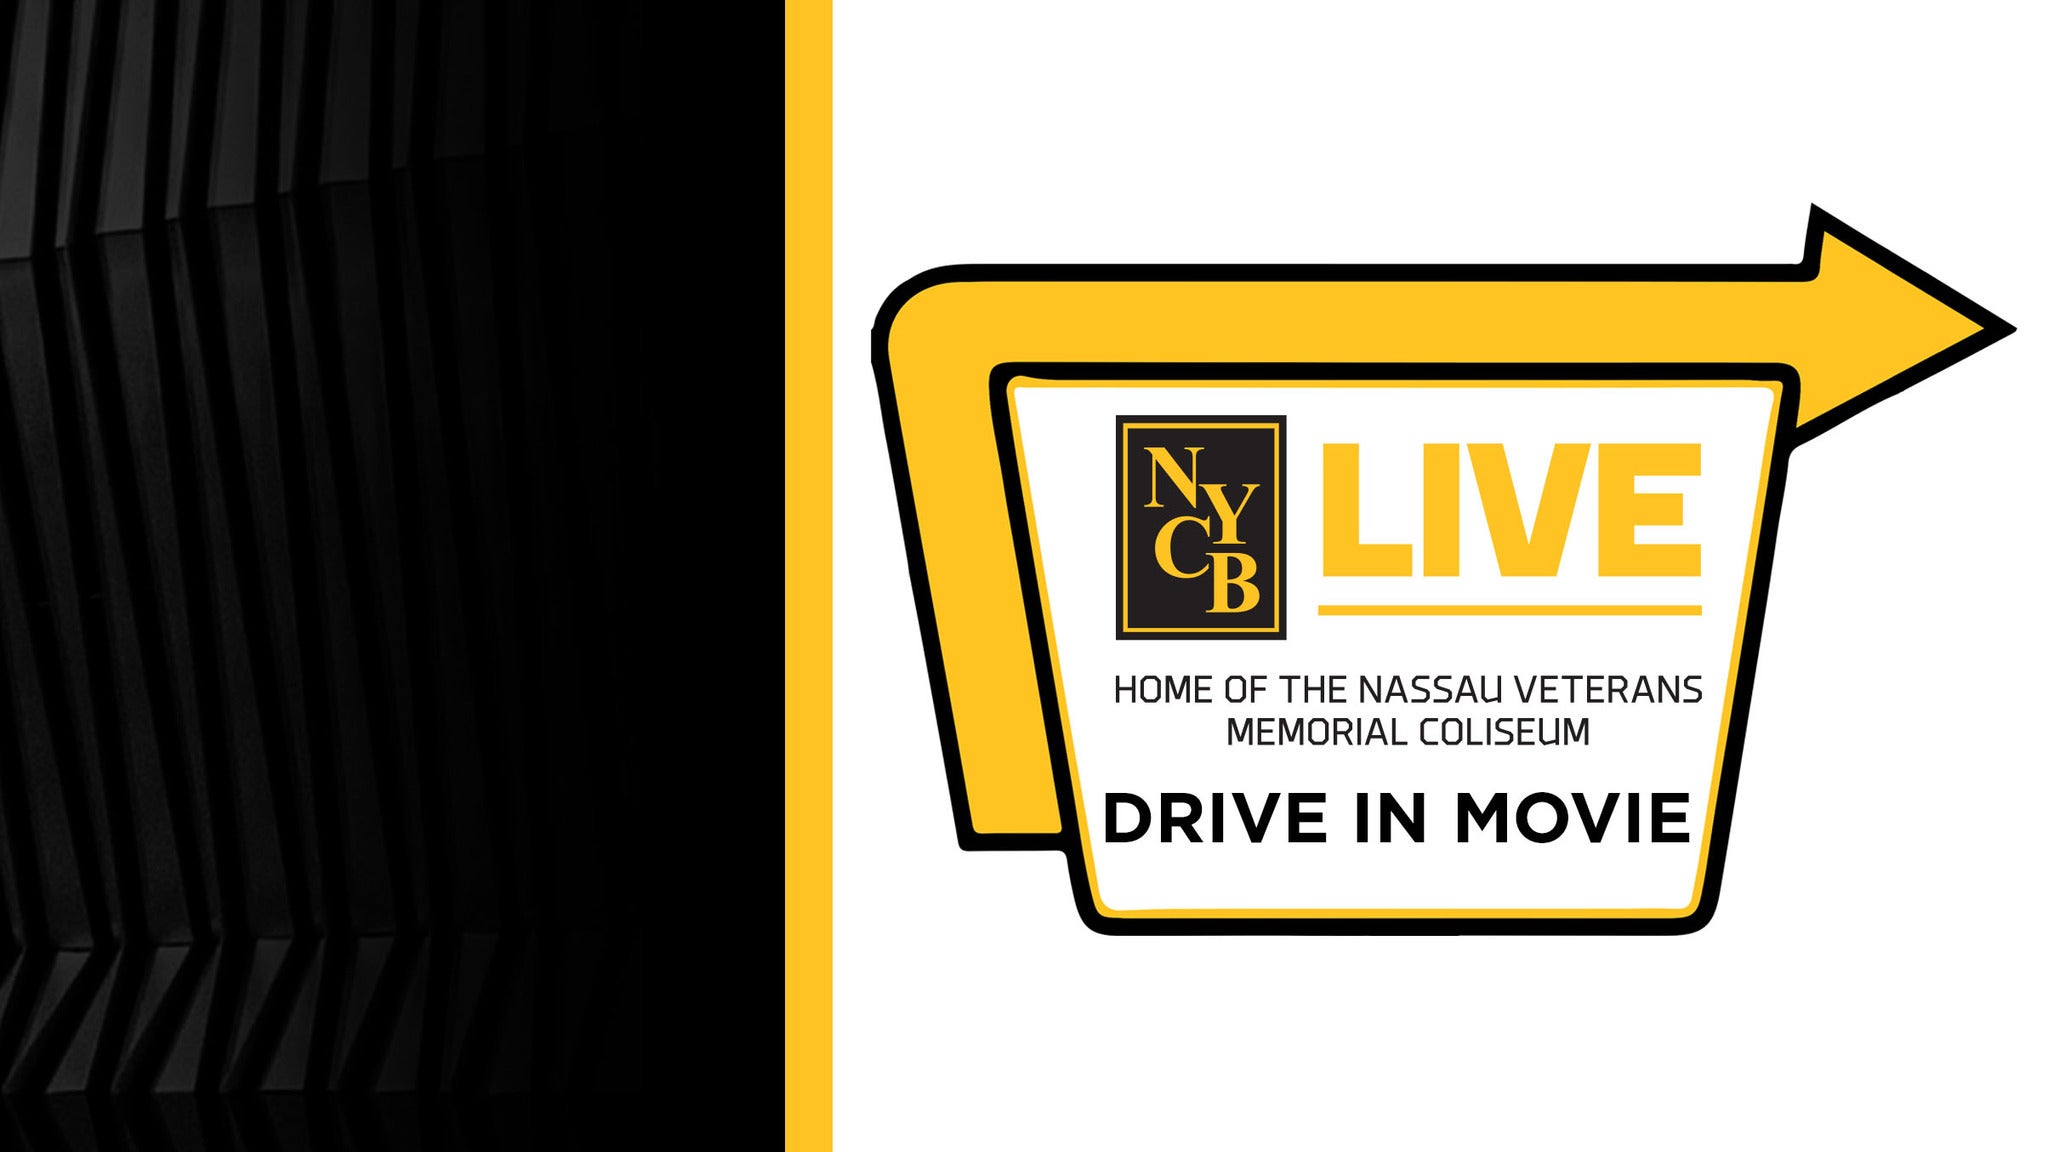 NYCB LIVE Drive in Movie tour dates, presales, tickets and more Box